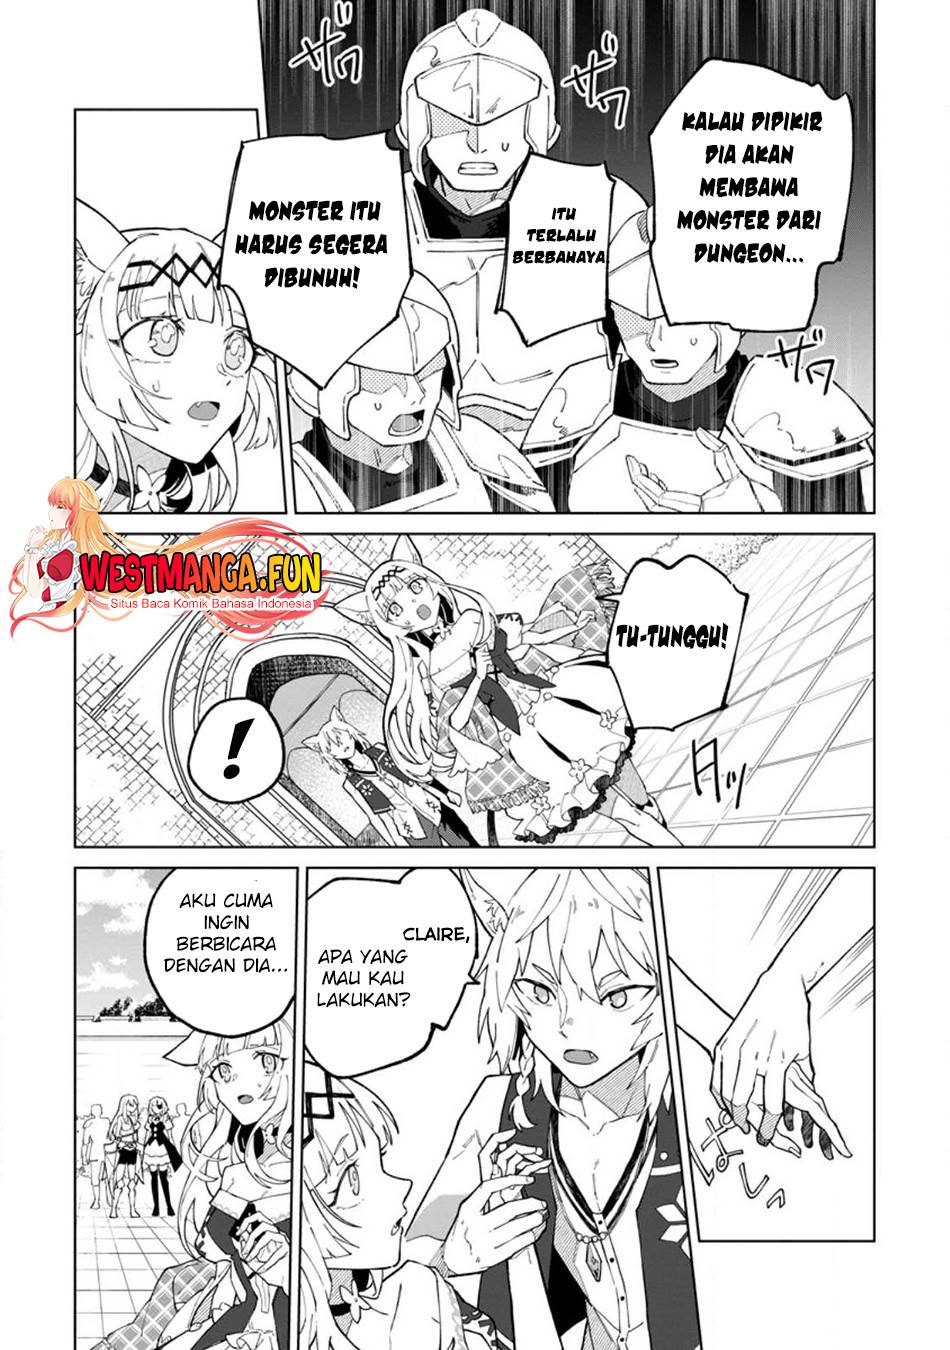 The White Mage Who Was Banished From the Hero’s Party Is Picked up by an S Rank Adventurer ~ This White Mage Is Too Out of the Ordinary! Chapter 28